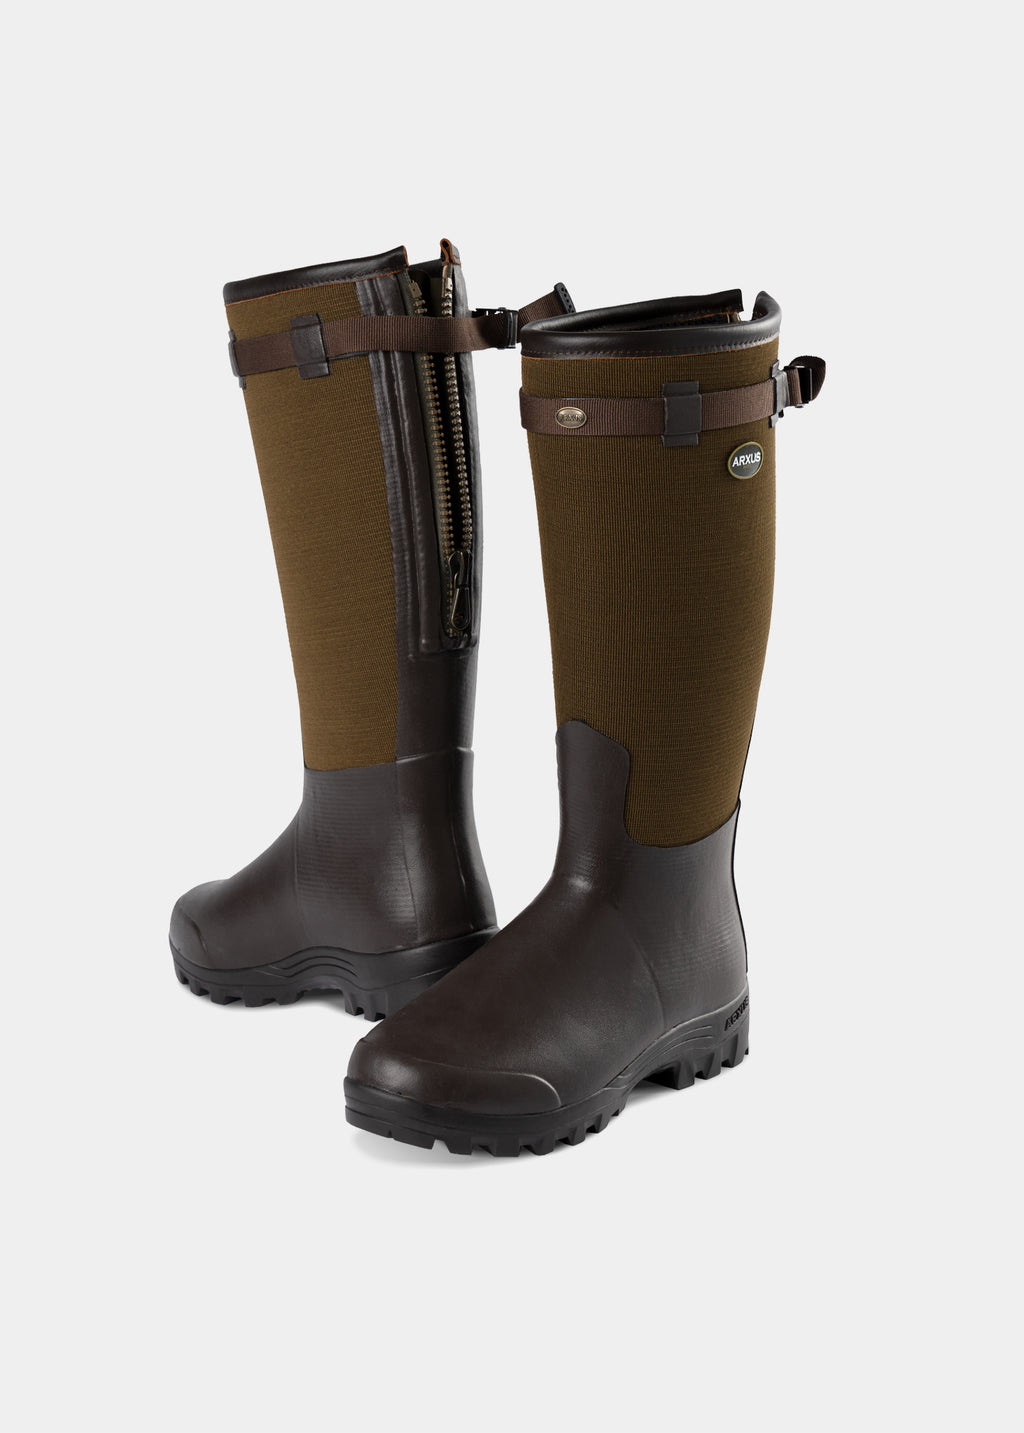 Arxus Primo Nord LW Wellington Boot In Olive | Alan Paine UK